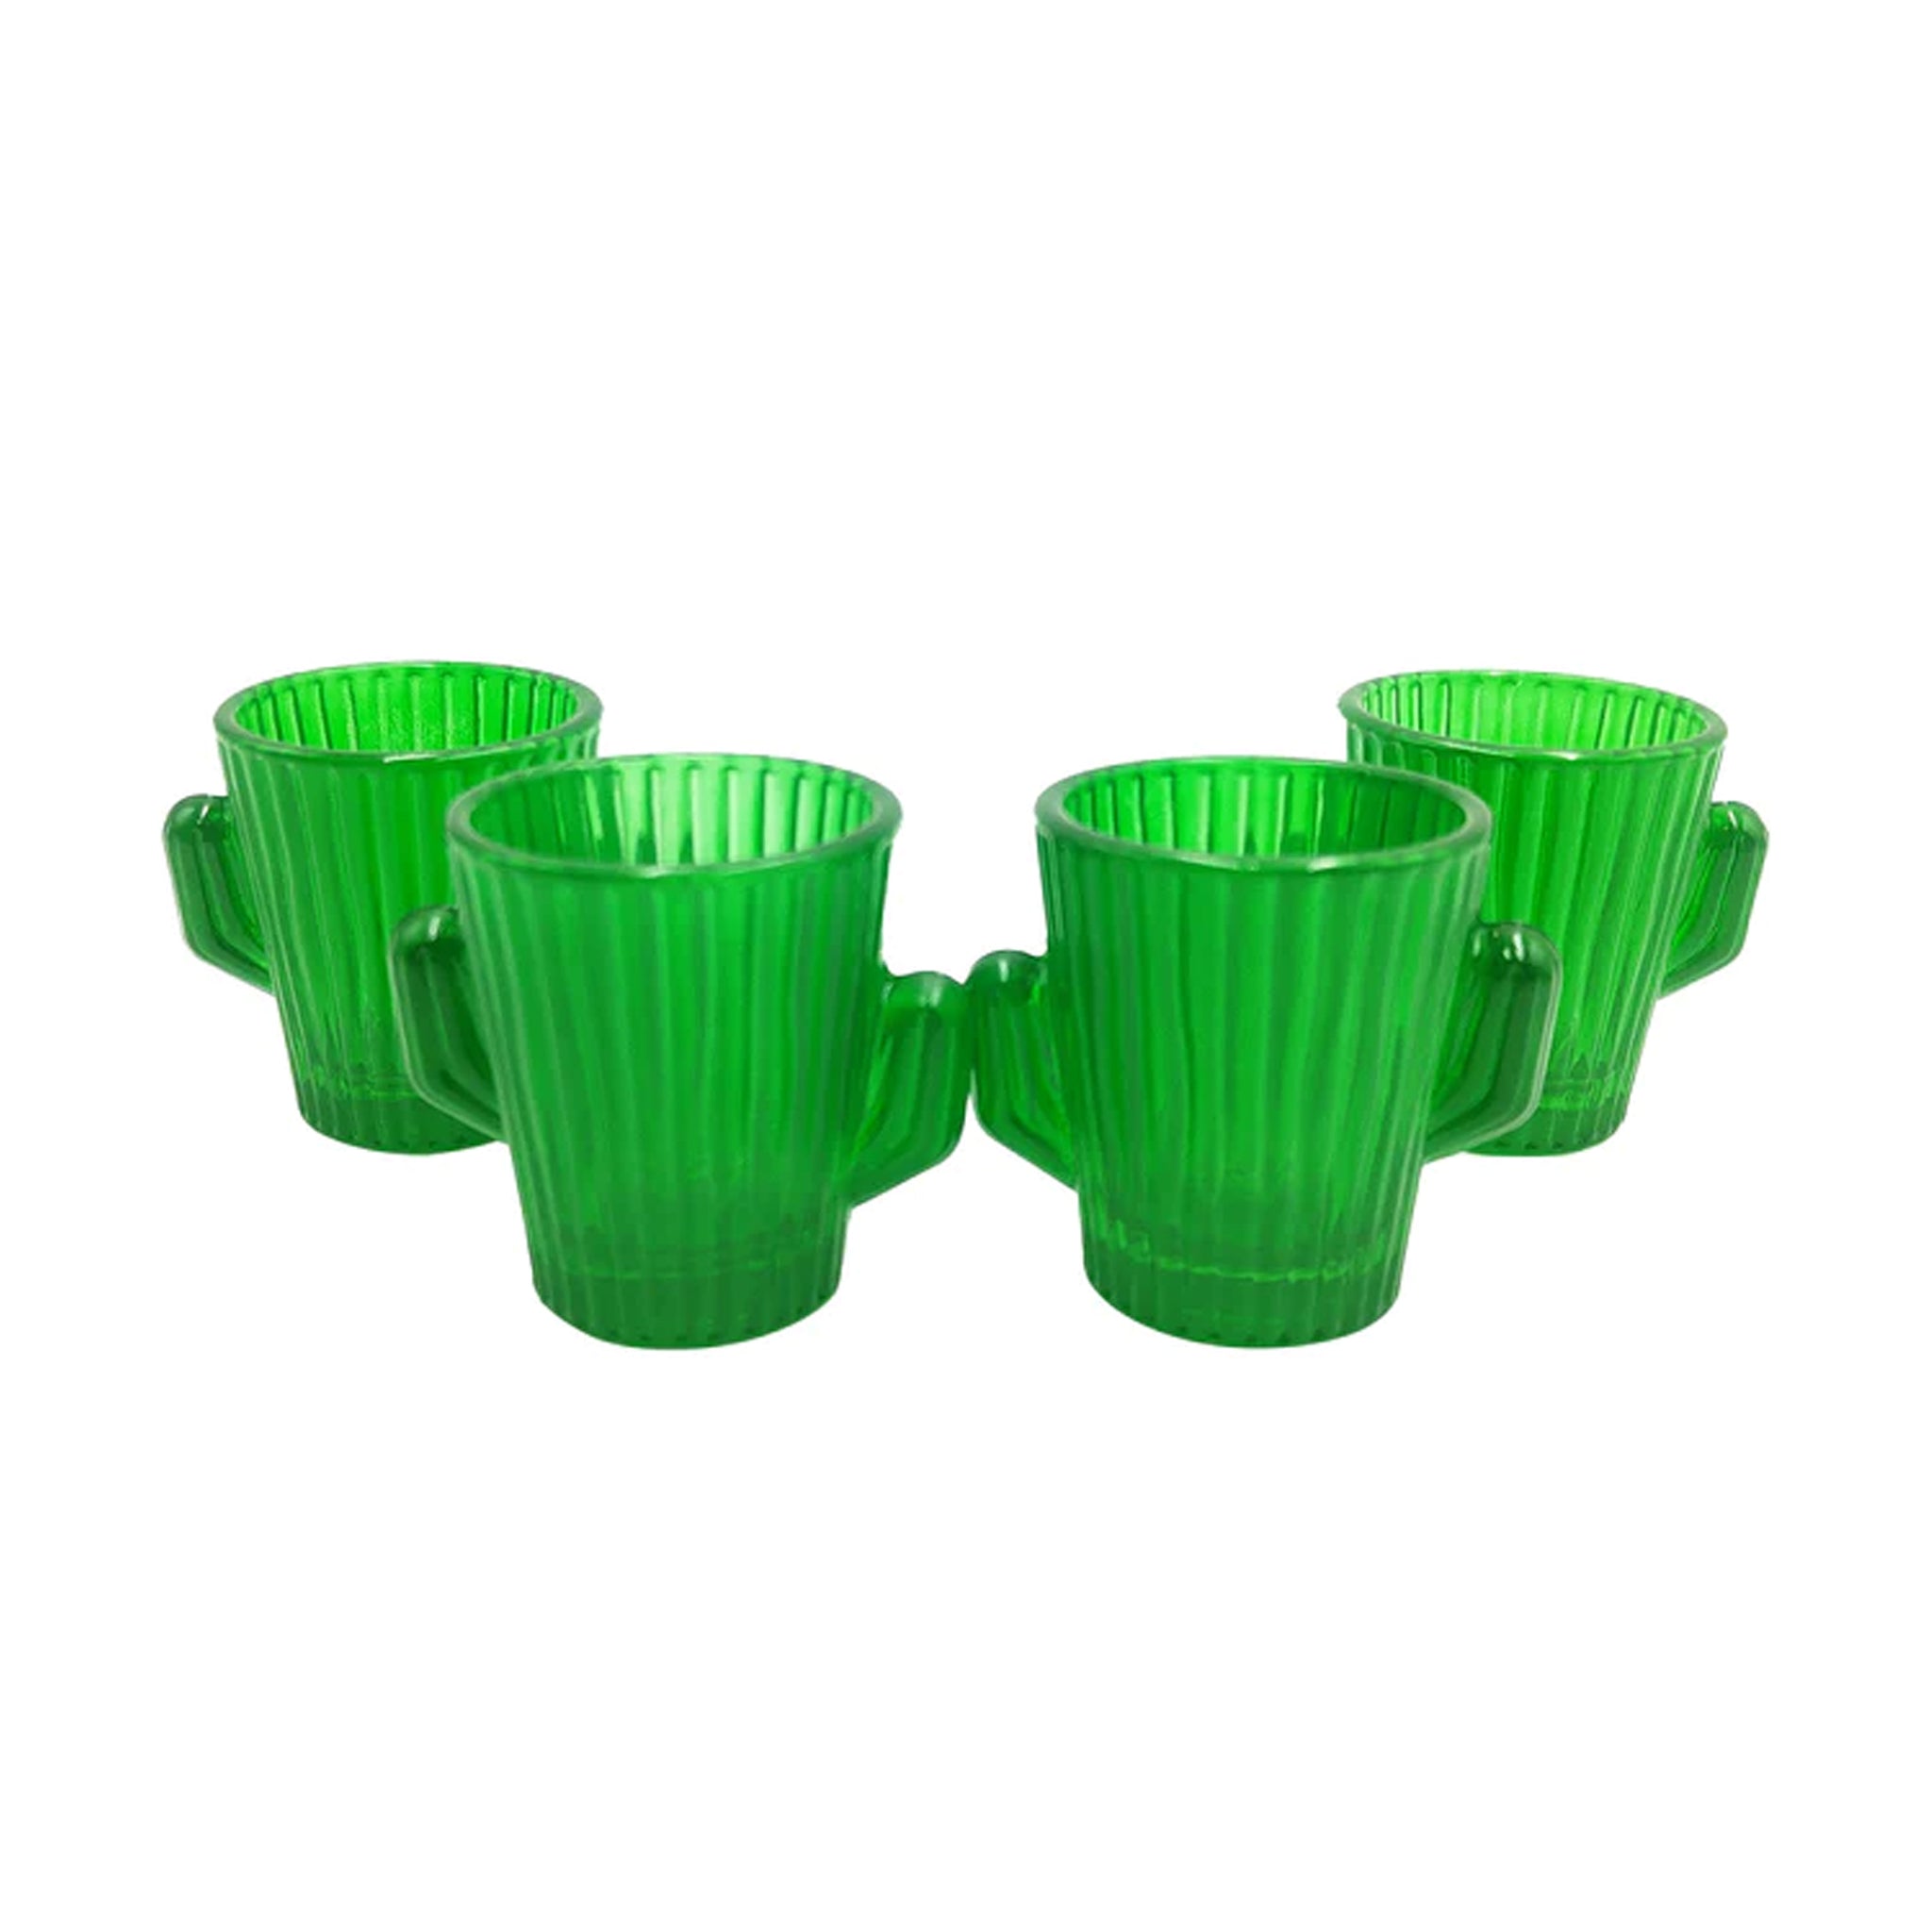 Cactus Shot Glasses - Set of 4 Lets Drink To That